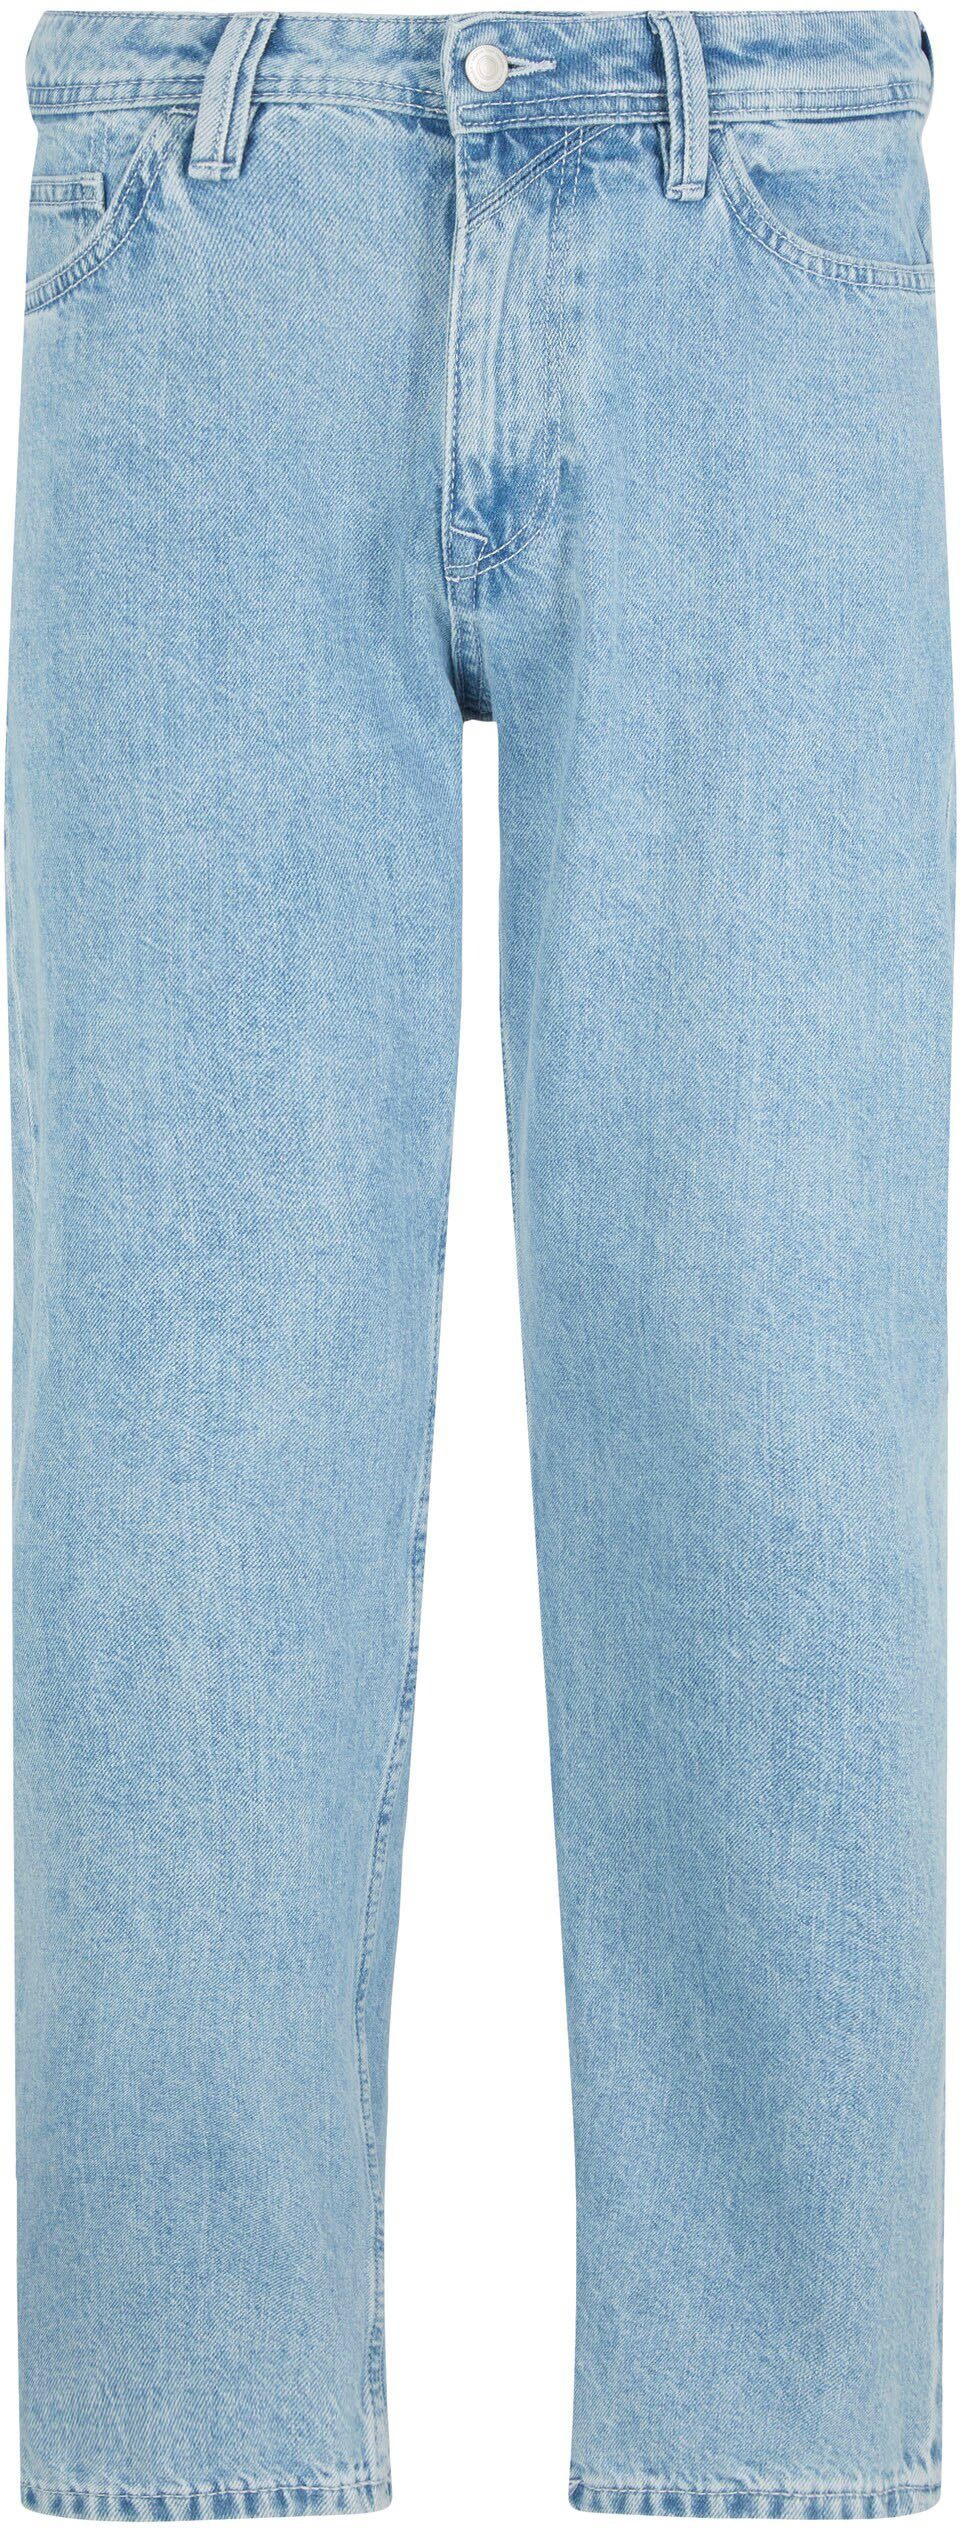 TOM TAILOR Denim Straight-Jeans clean bleached